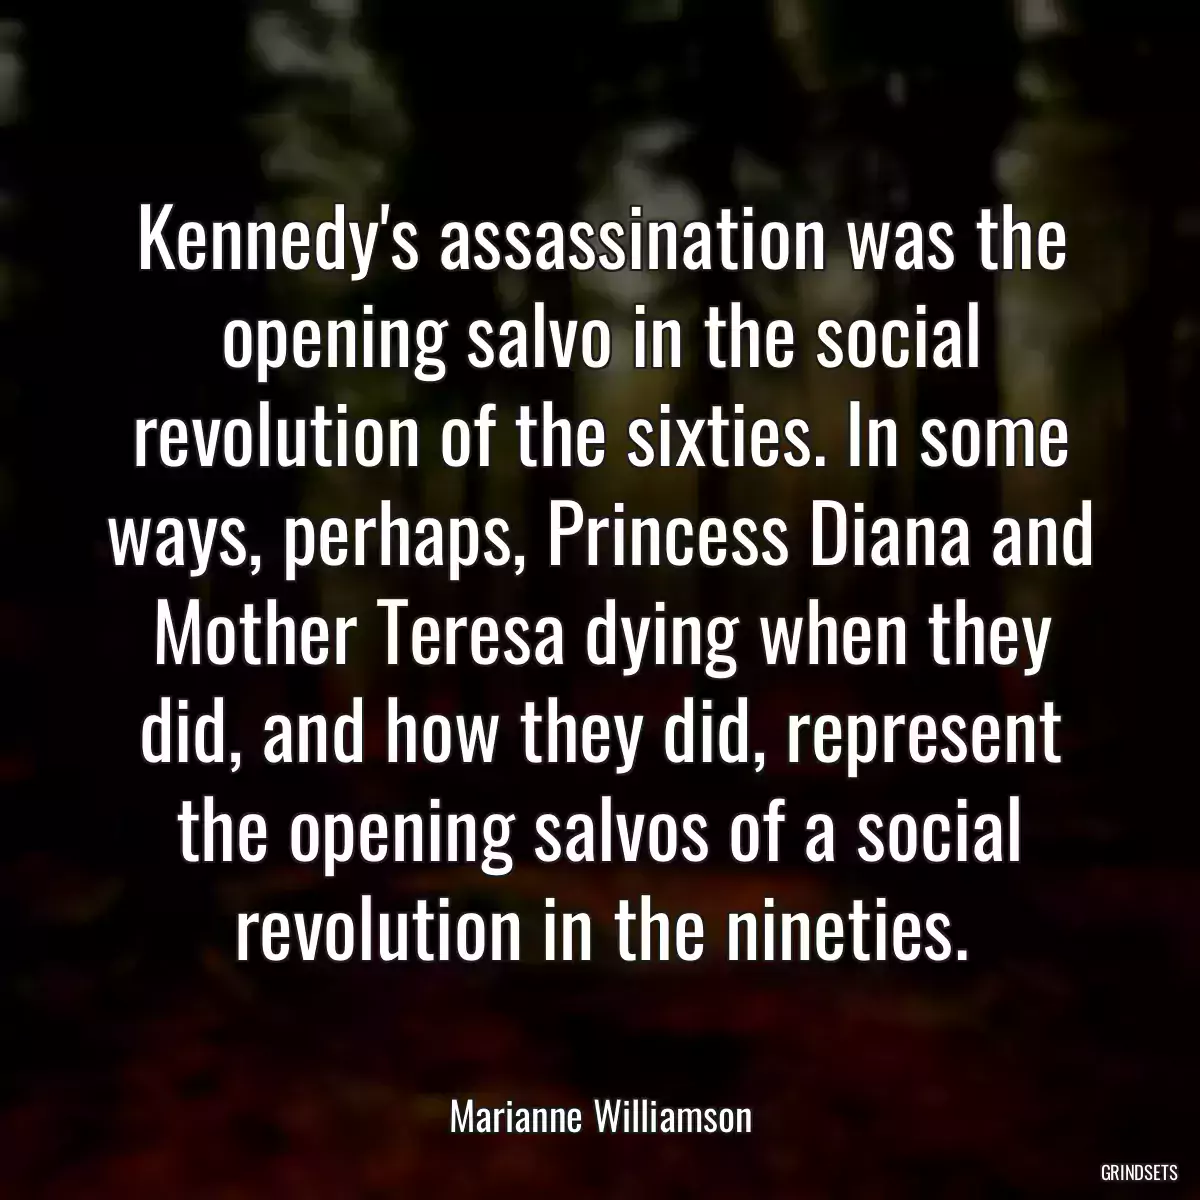 Kennedy\'s assassination was the opening salvo in the social revolution of the sixties. In some ways, perhaps, Princess Diana and Mother Teresa dying when they did, and how they did, represent the opening salvos of a social revolution in the nineties.